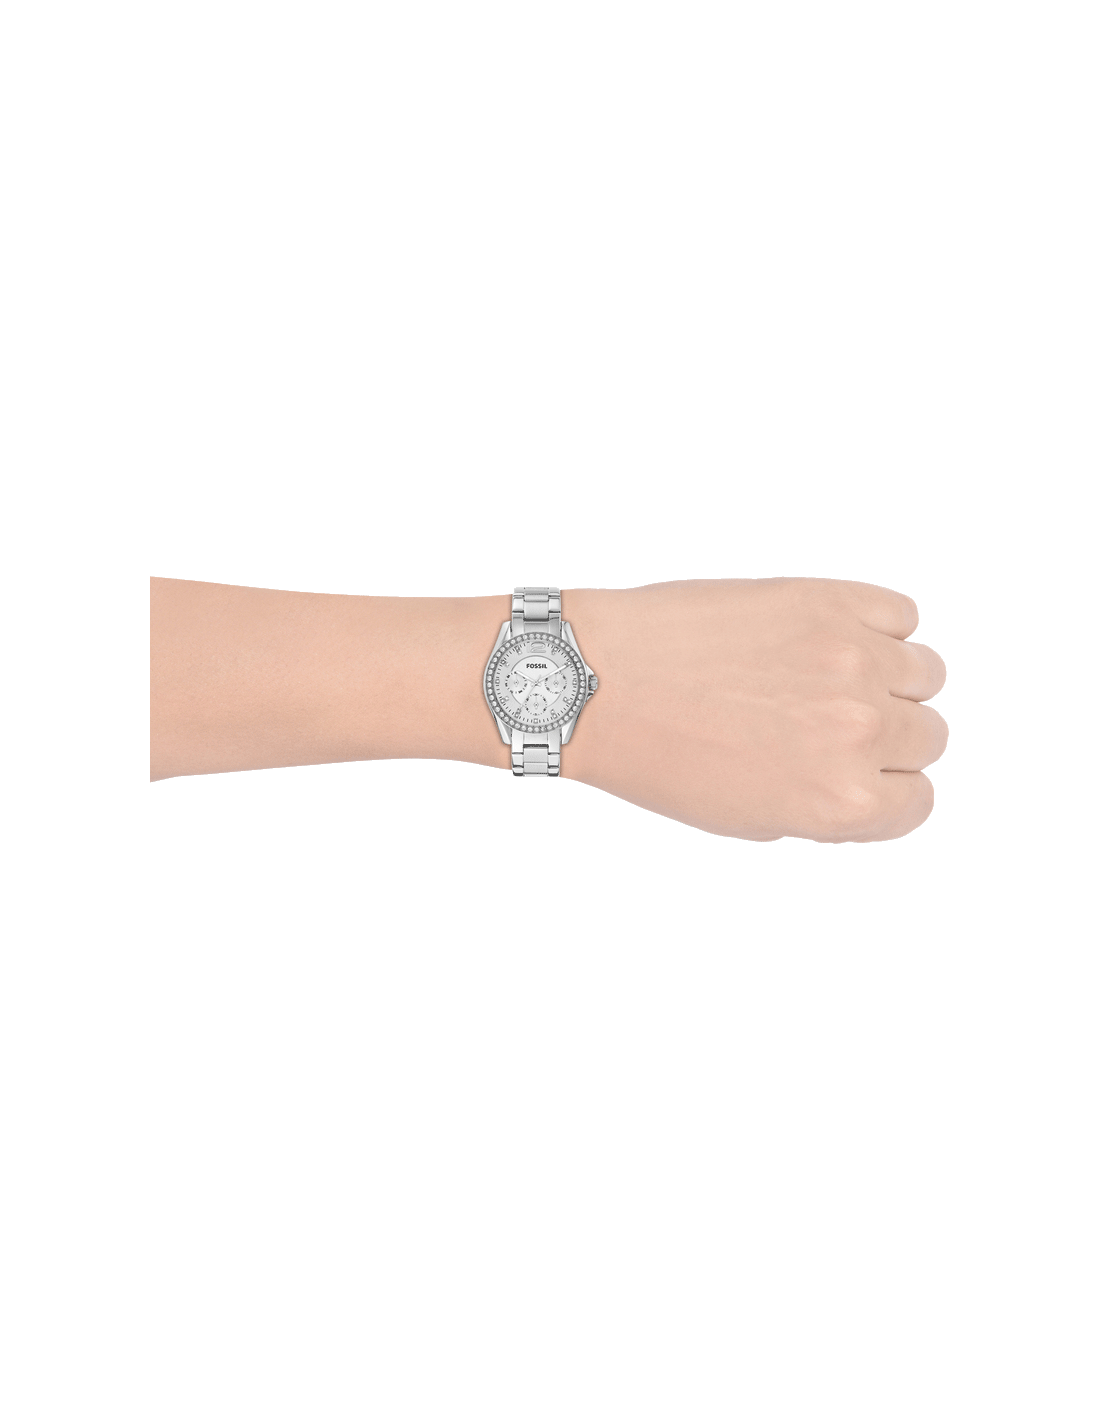 Riley Multifunction Stainless Steel Watch | Fossil | Luby 